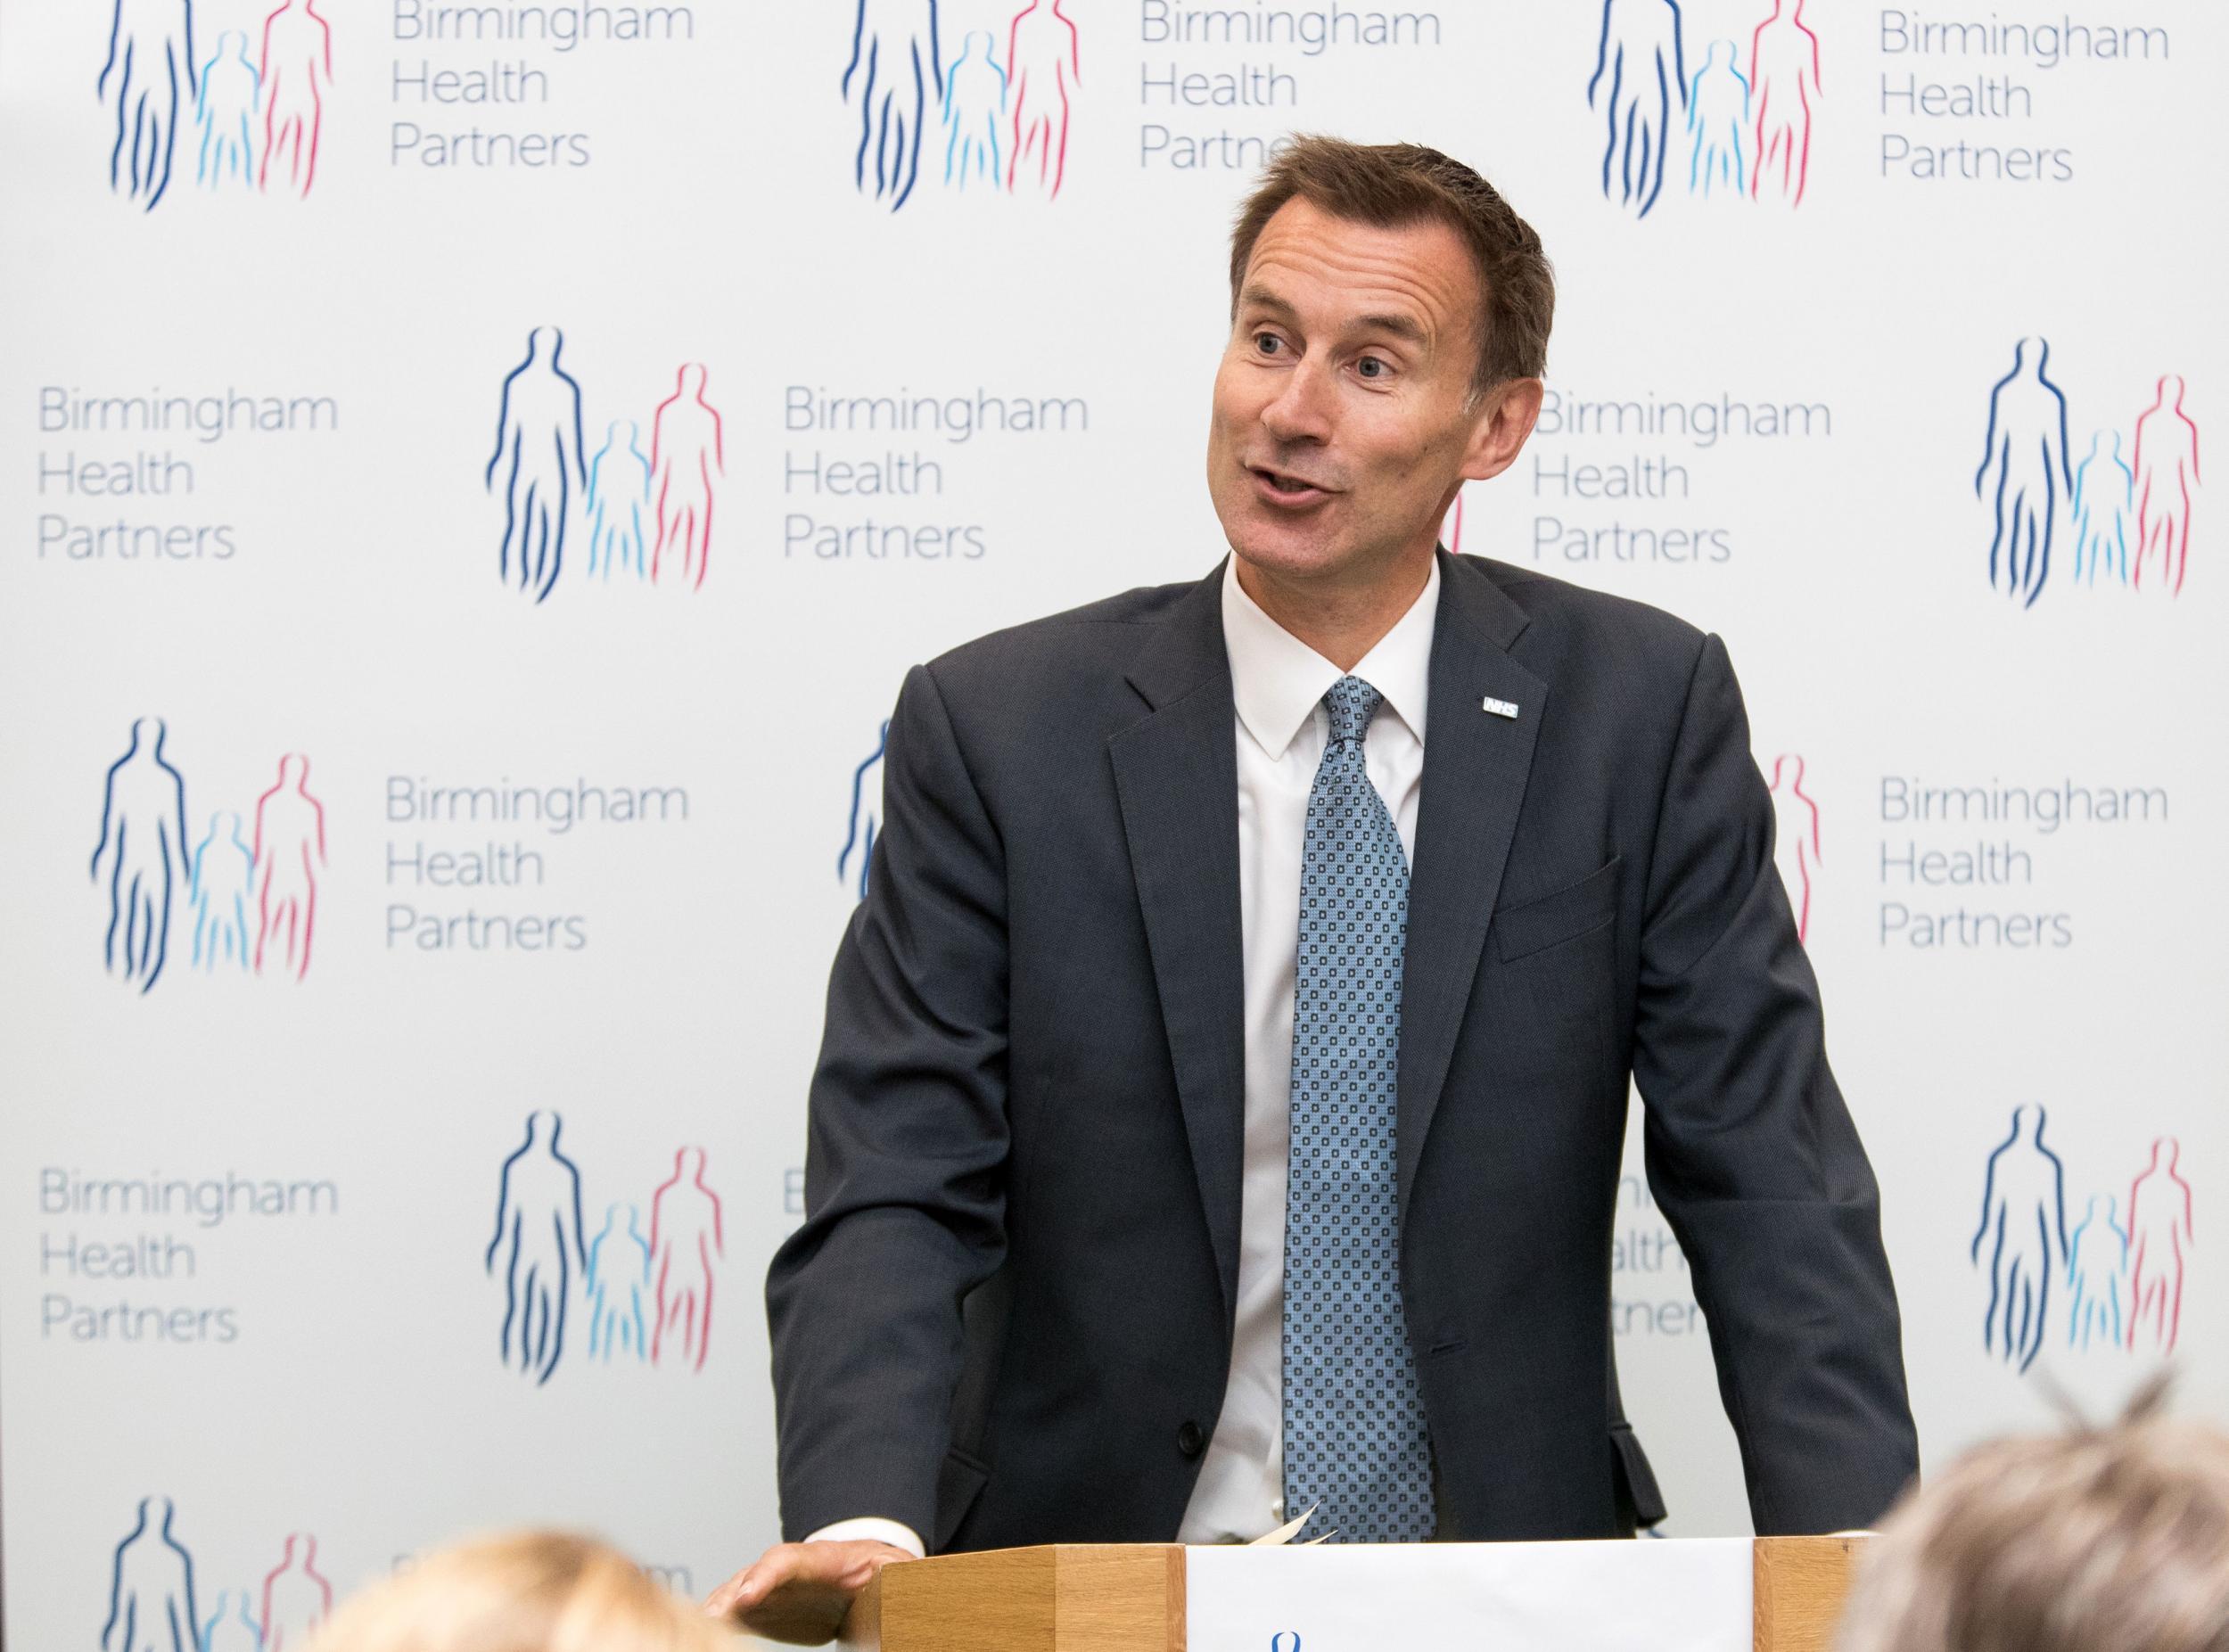 Jeremy Hunt's cost saving plans for the NHS are reducing it to a skeleton service